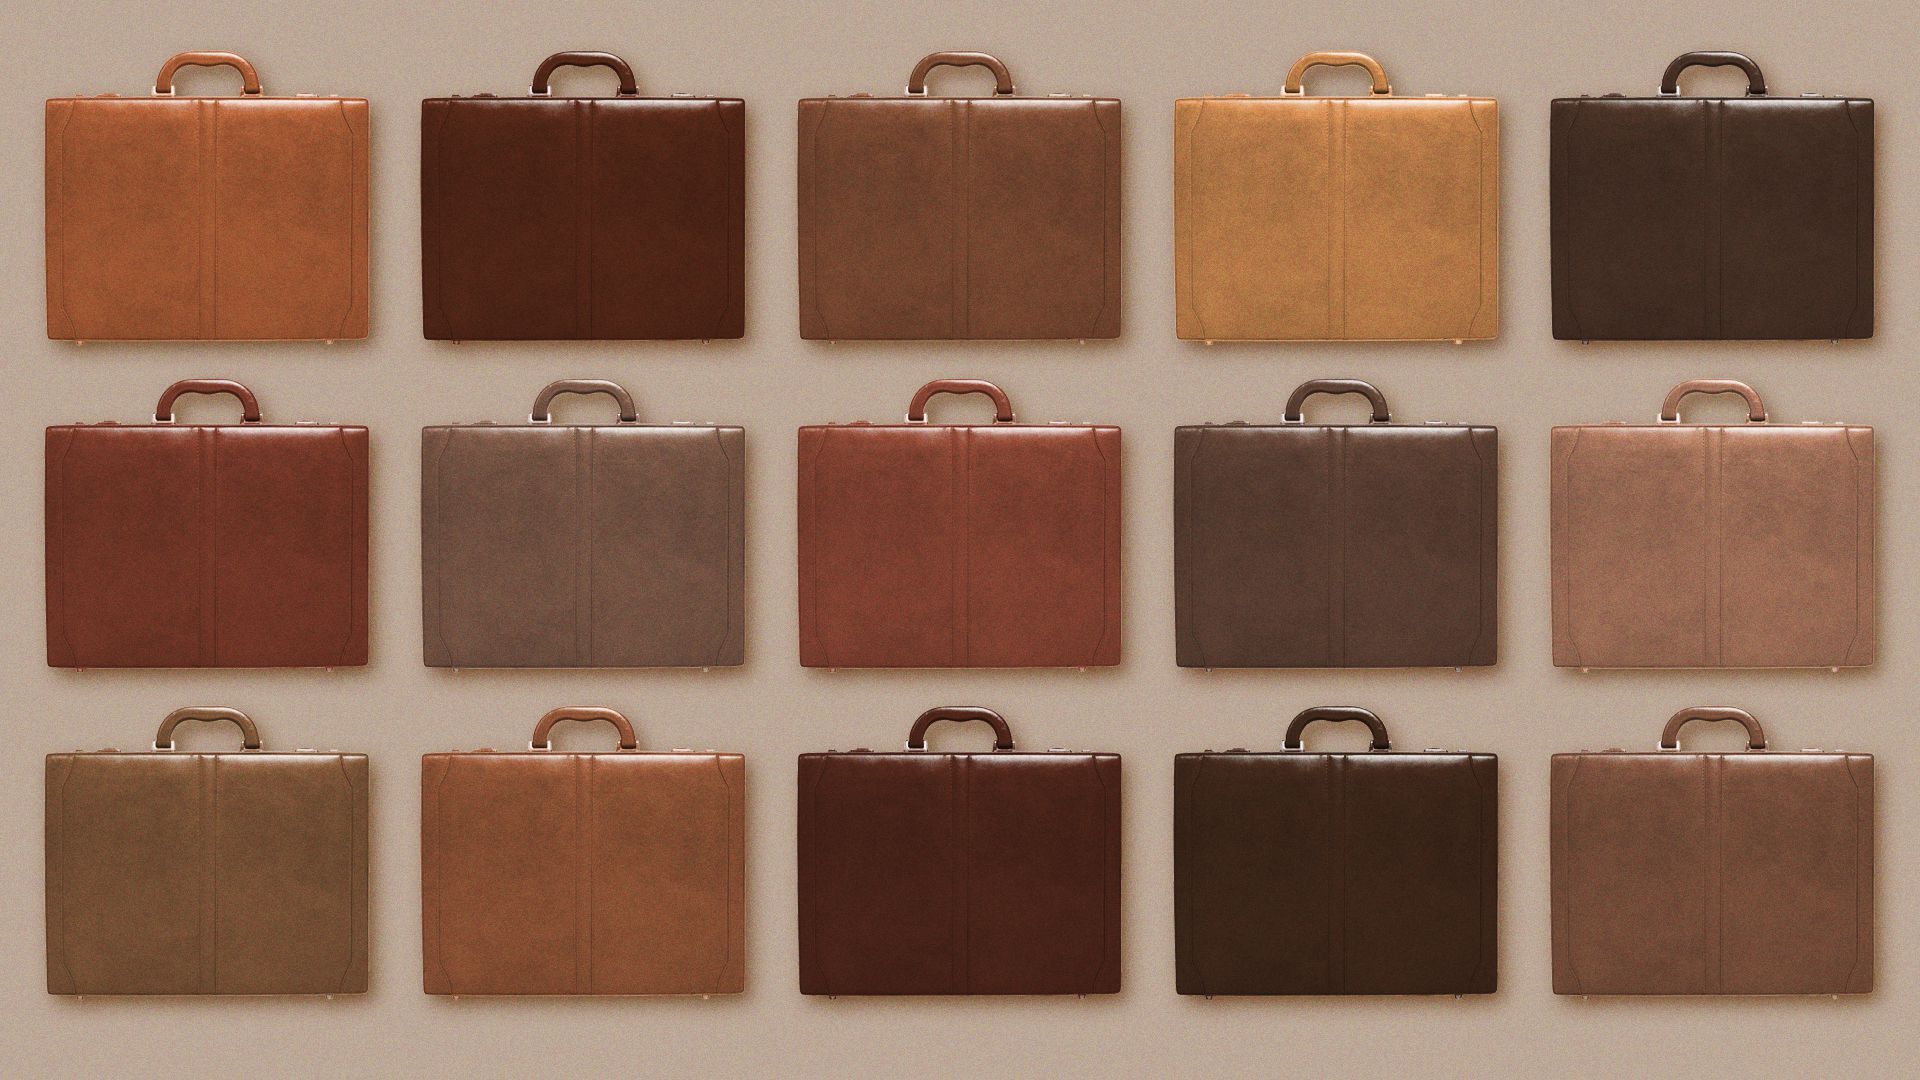 Pattern of briefcases in different skintones.